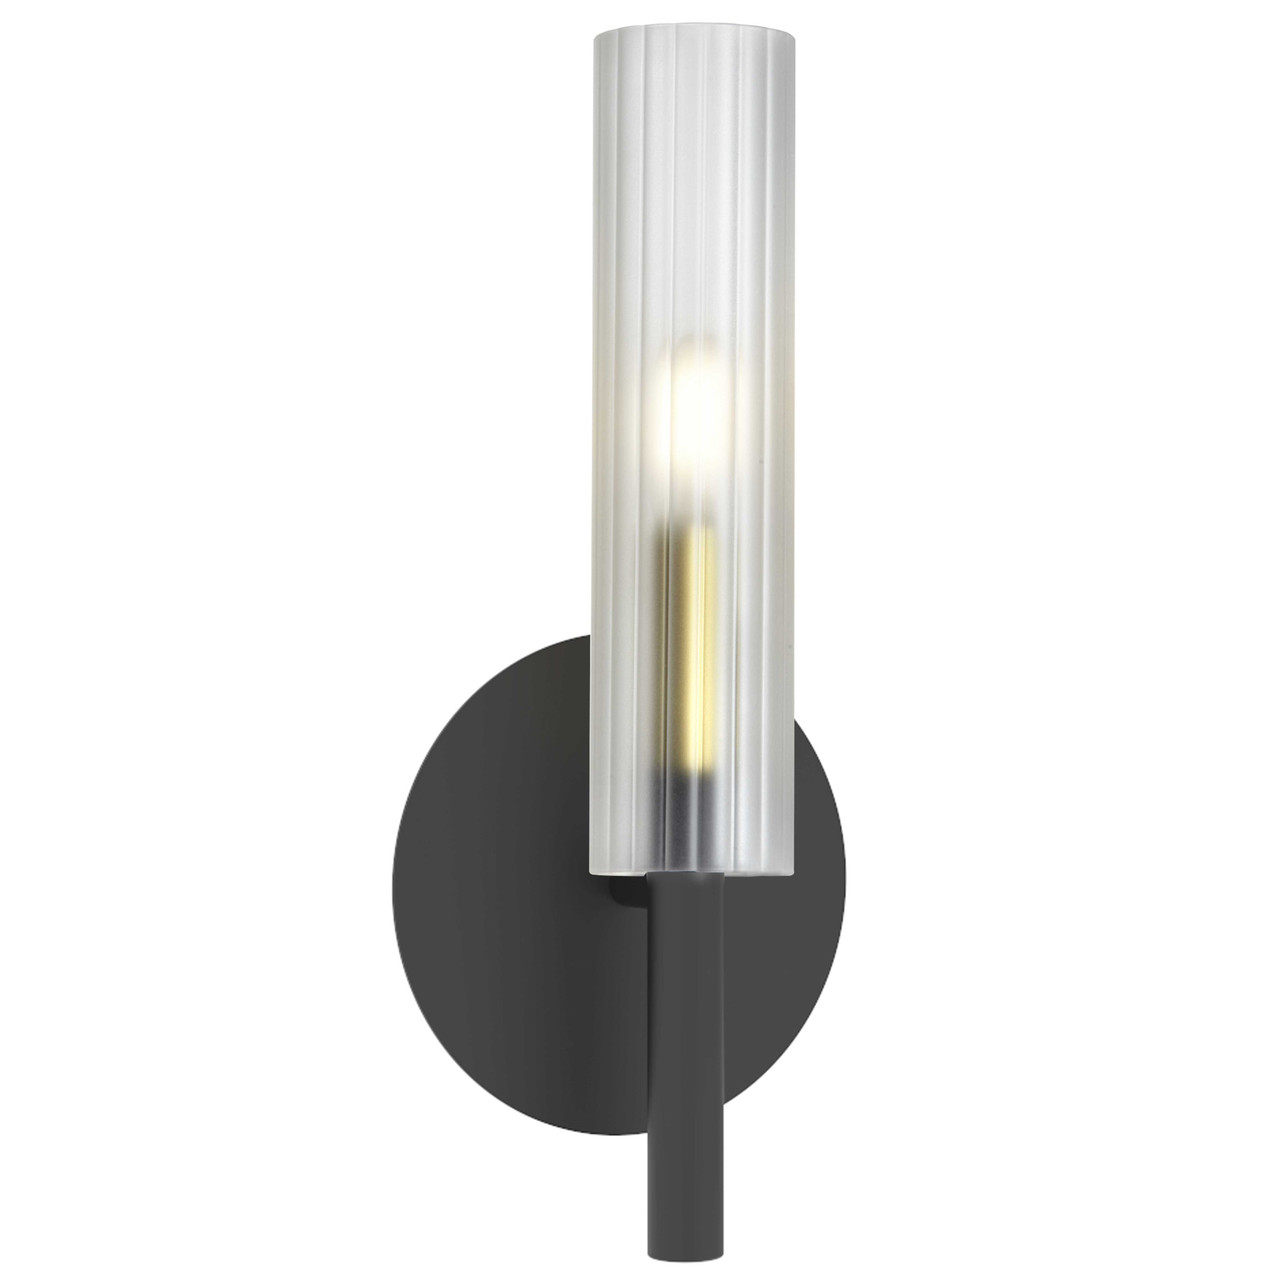 DAINOLITE WAN-171W-MB-AGB-FR 1 Light Incandescent Wand Wall Sconce Matte Black & Aged Brass w/ Frosted Glass